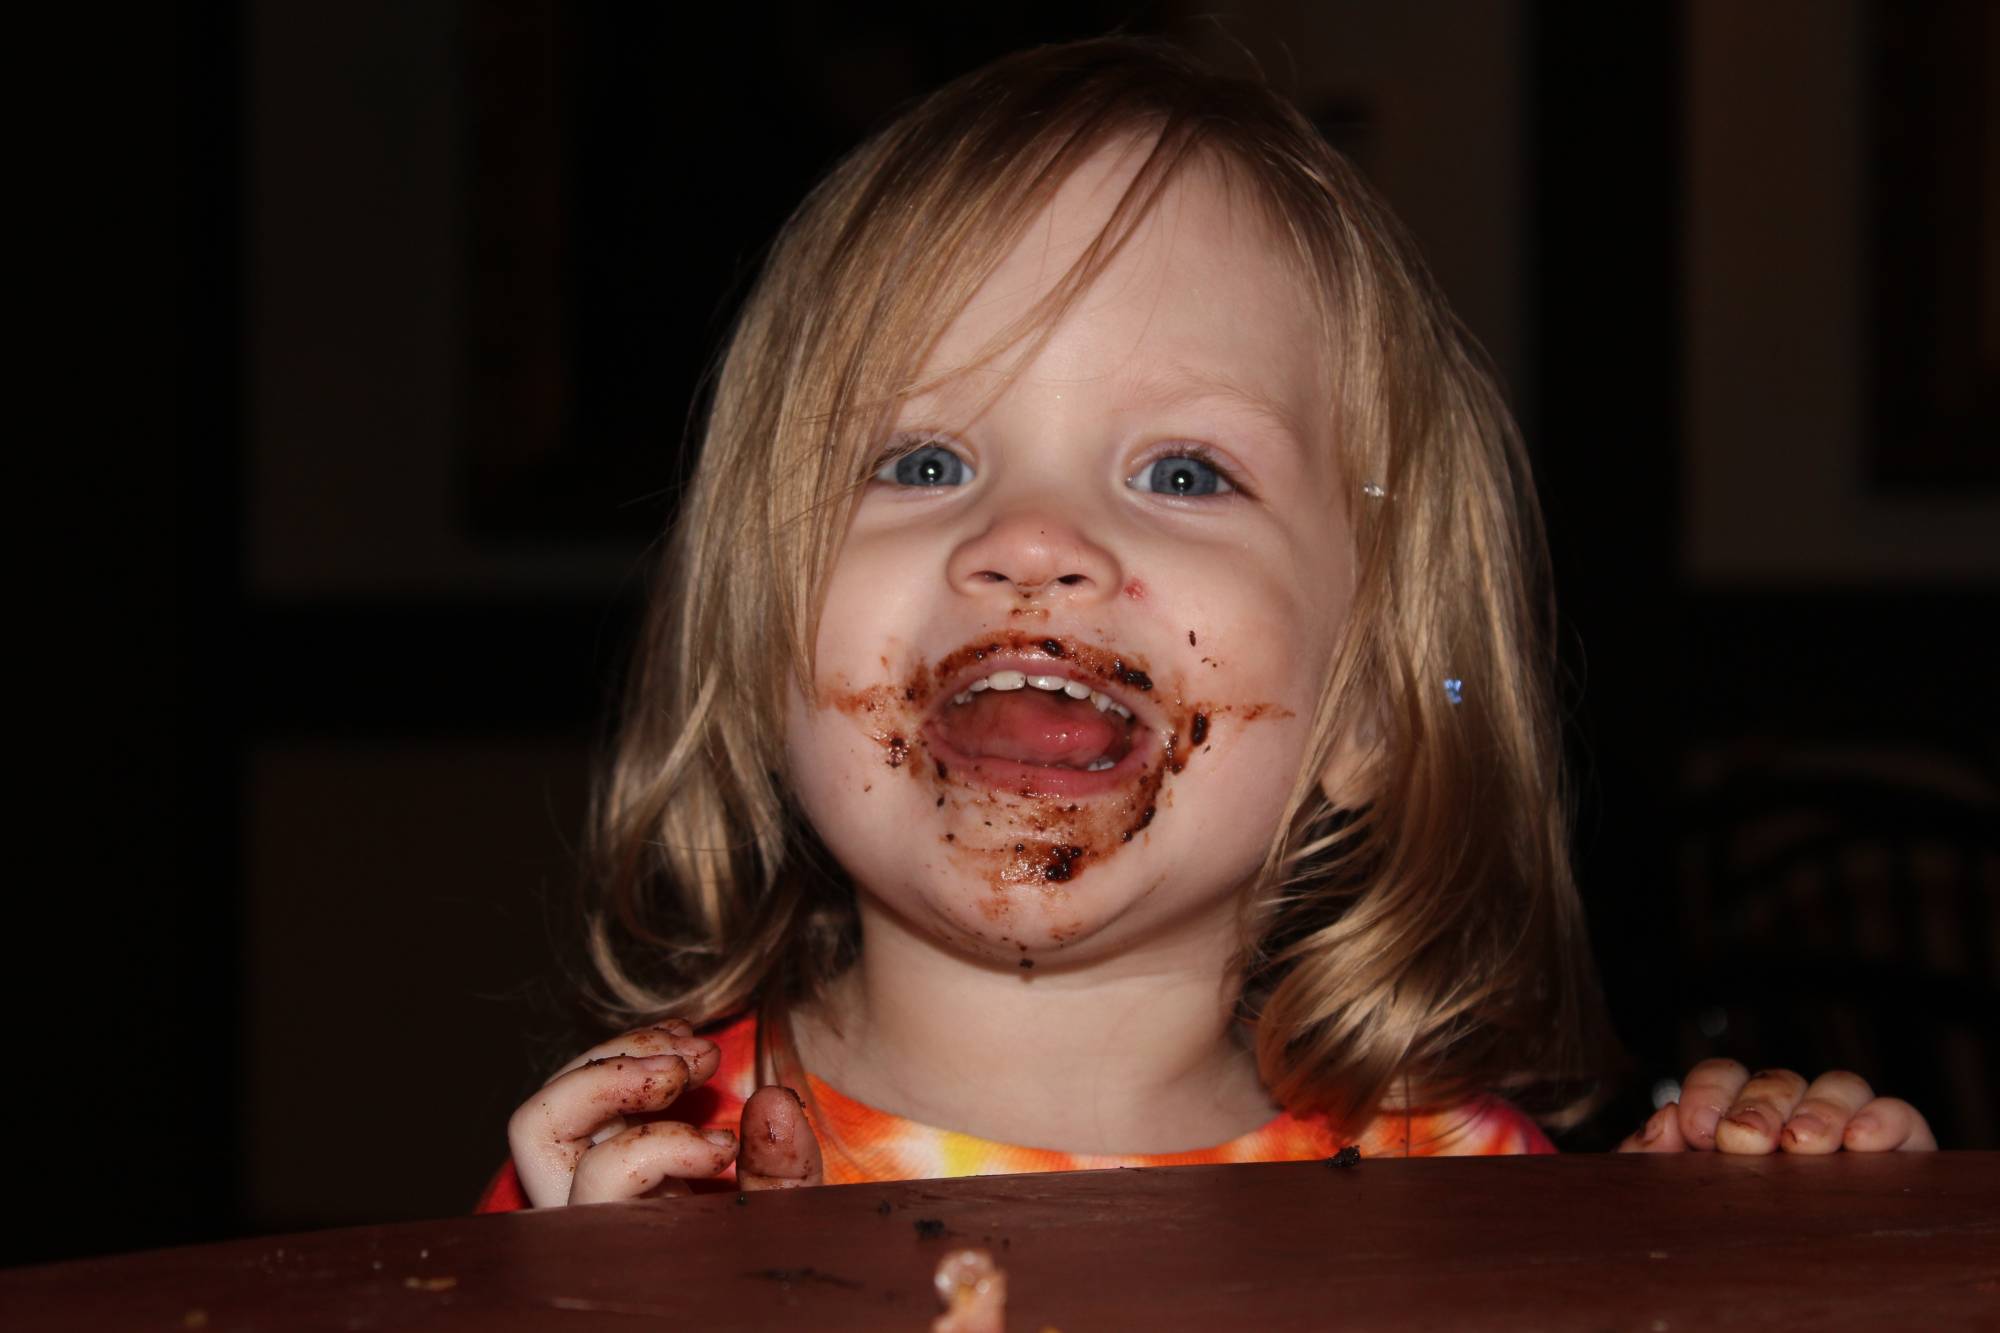 She loves the Famous Disney Chocolate Cake!